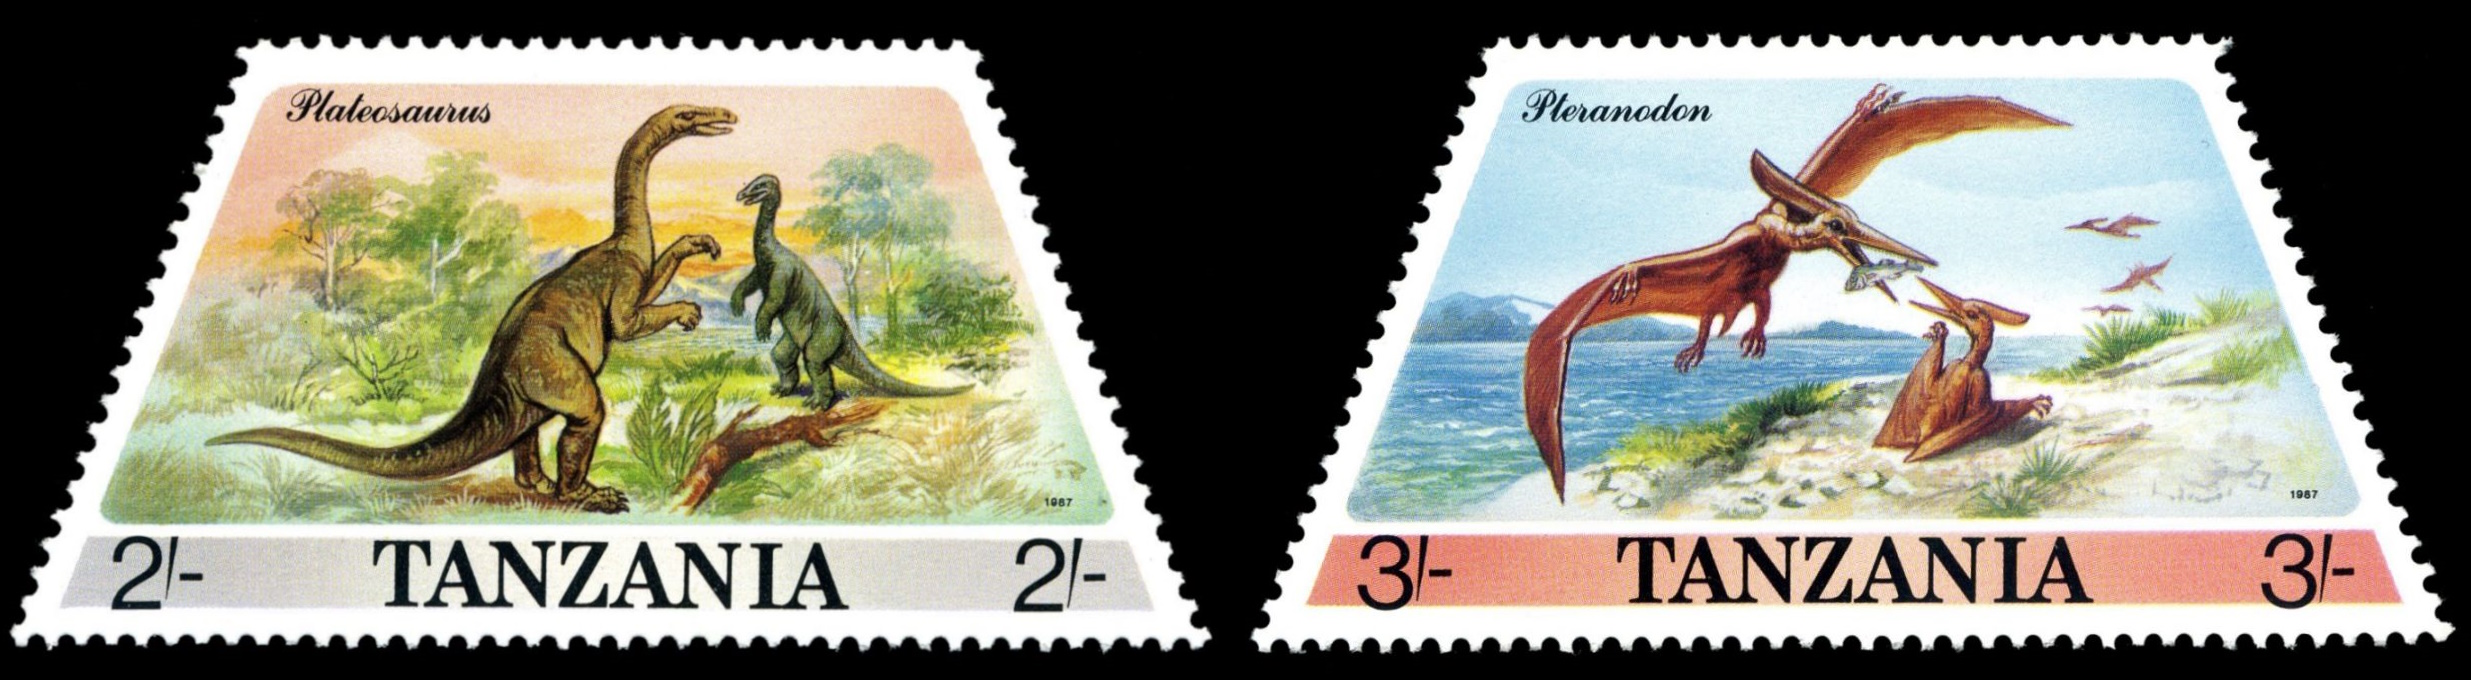 Prehistoric and modern animals on stamps of Tanzania